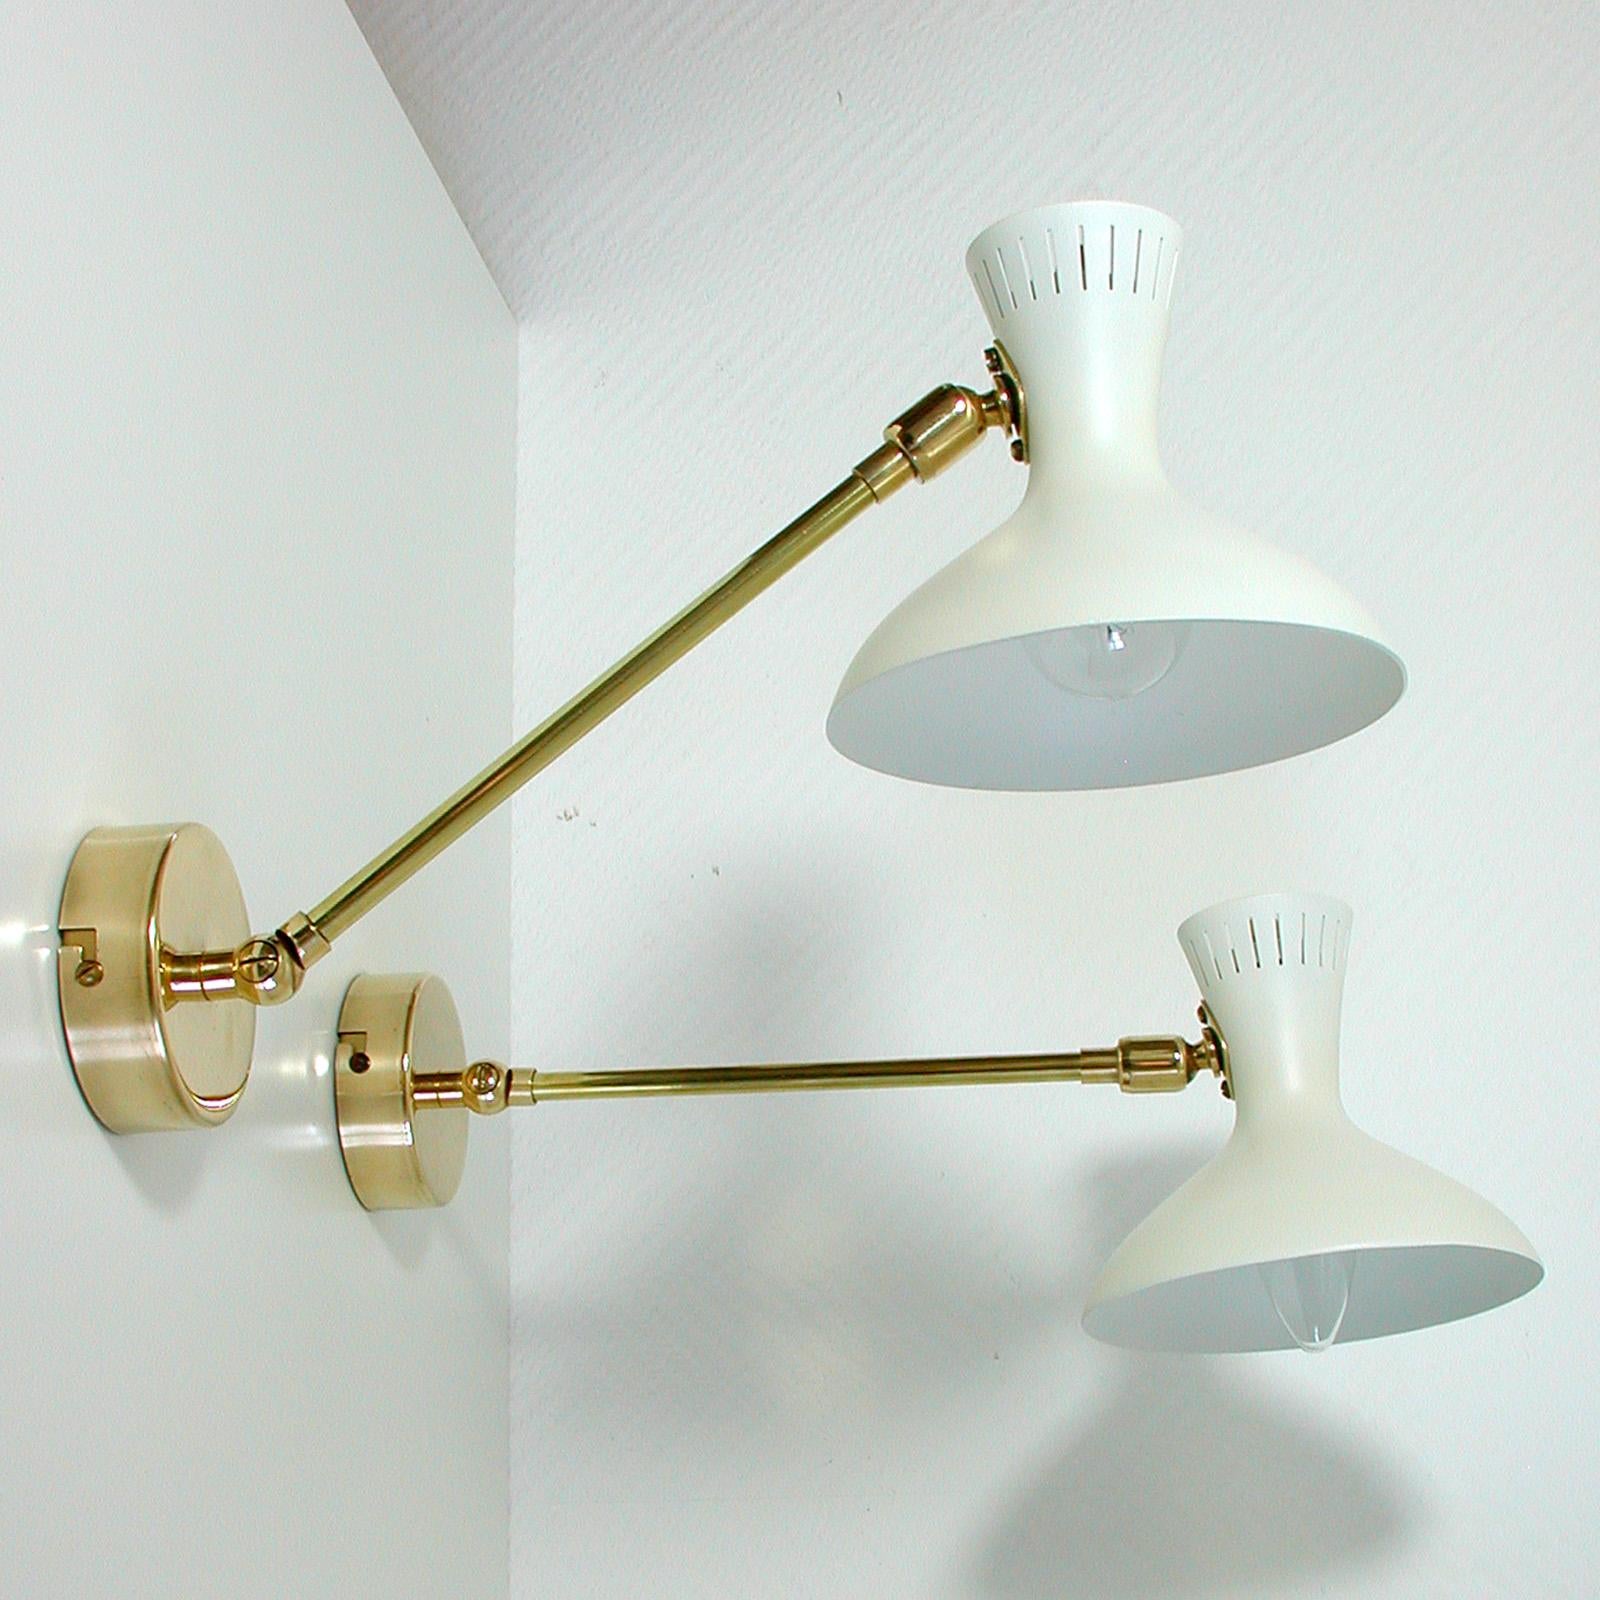 Very elegant pair of midcentury brass and white lacquered metal potence wall lights, made in France in the 1950s.

The sconces have got brass bases and adjustable brass articulating lamp arms. The shades are made of white lacquered metal.

The